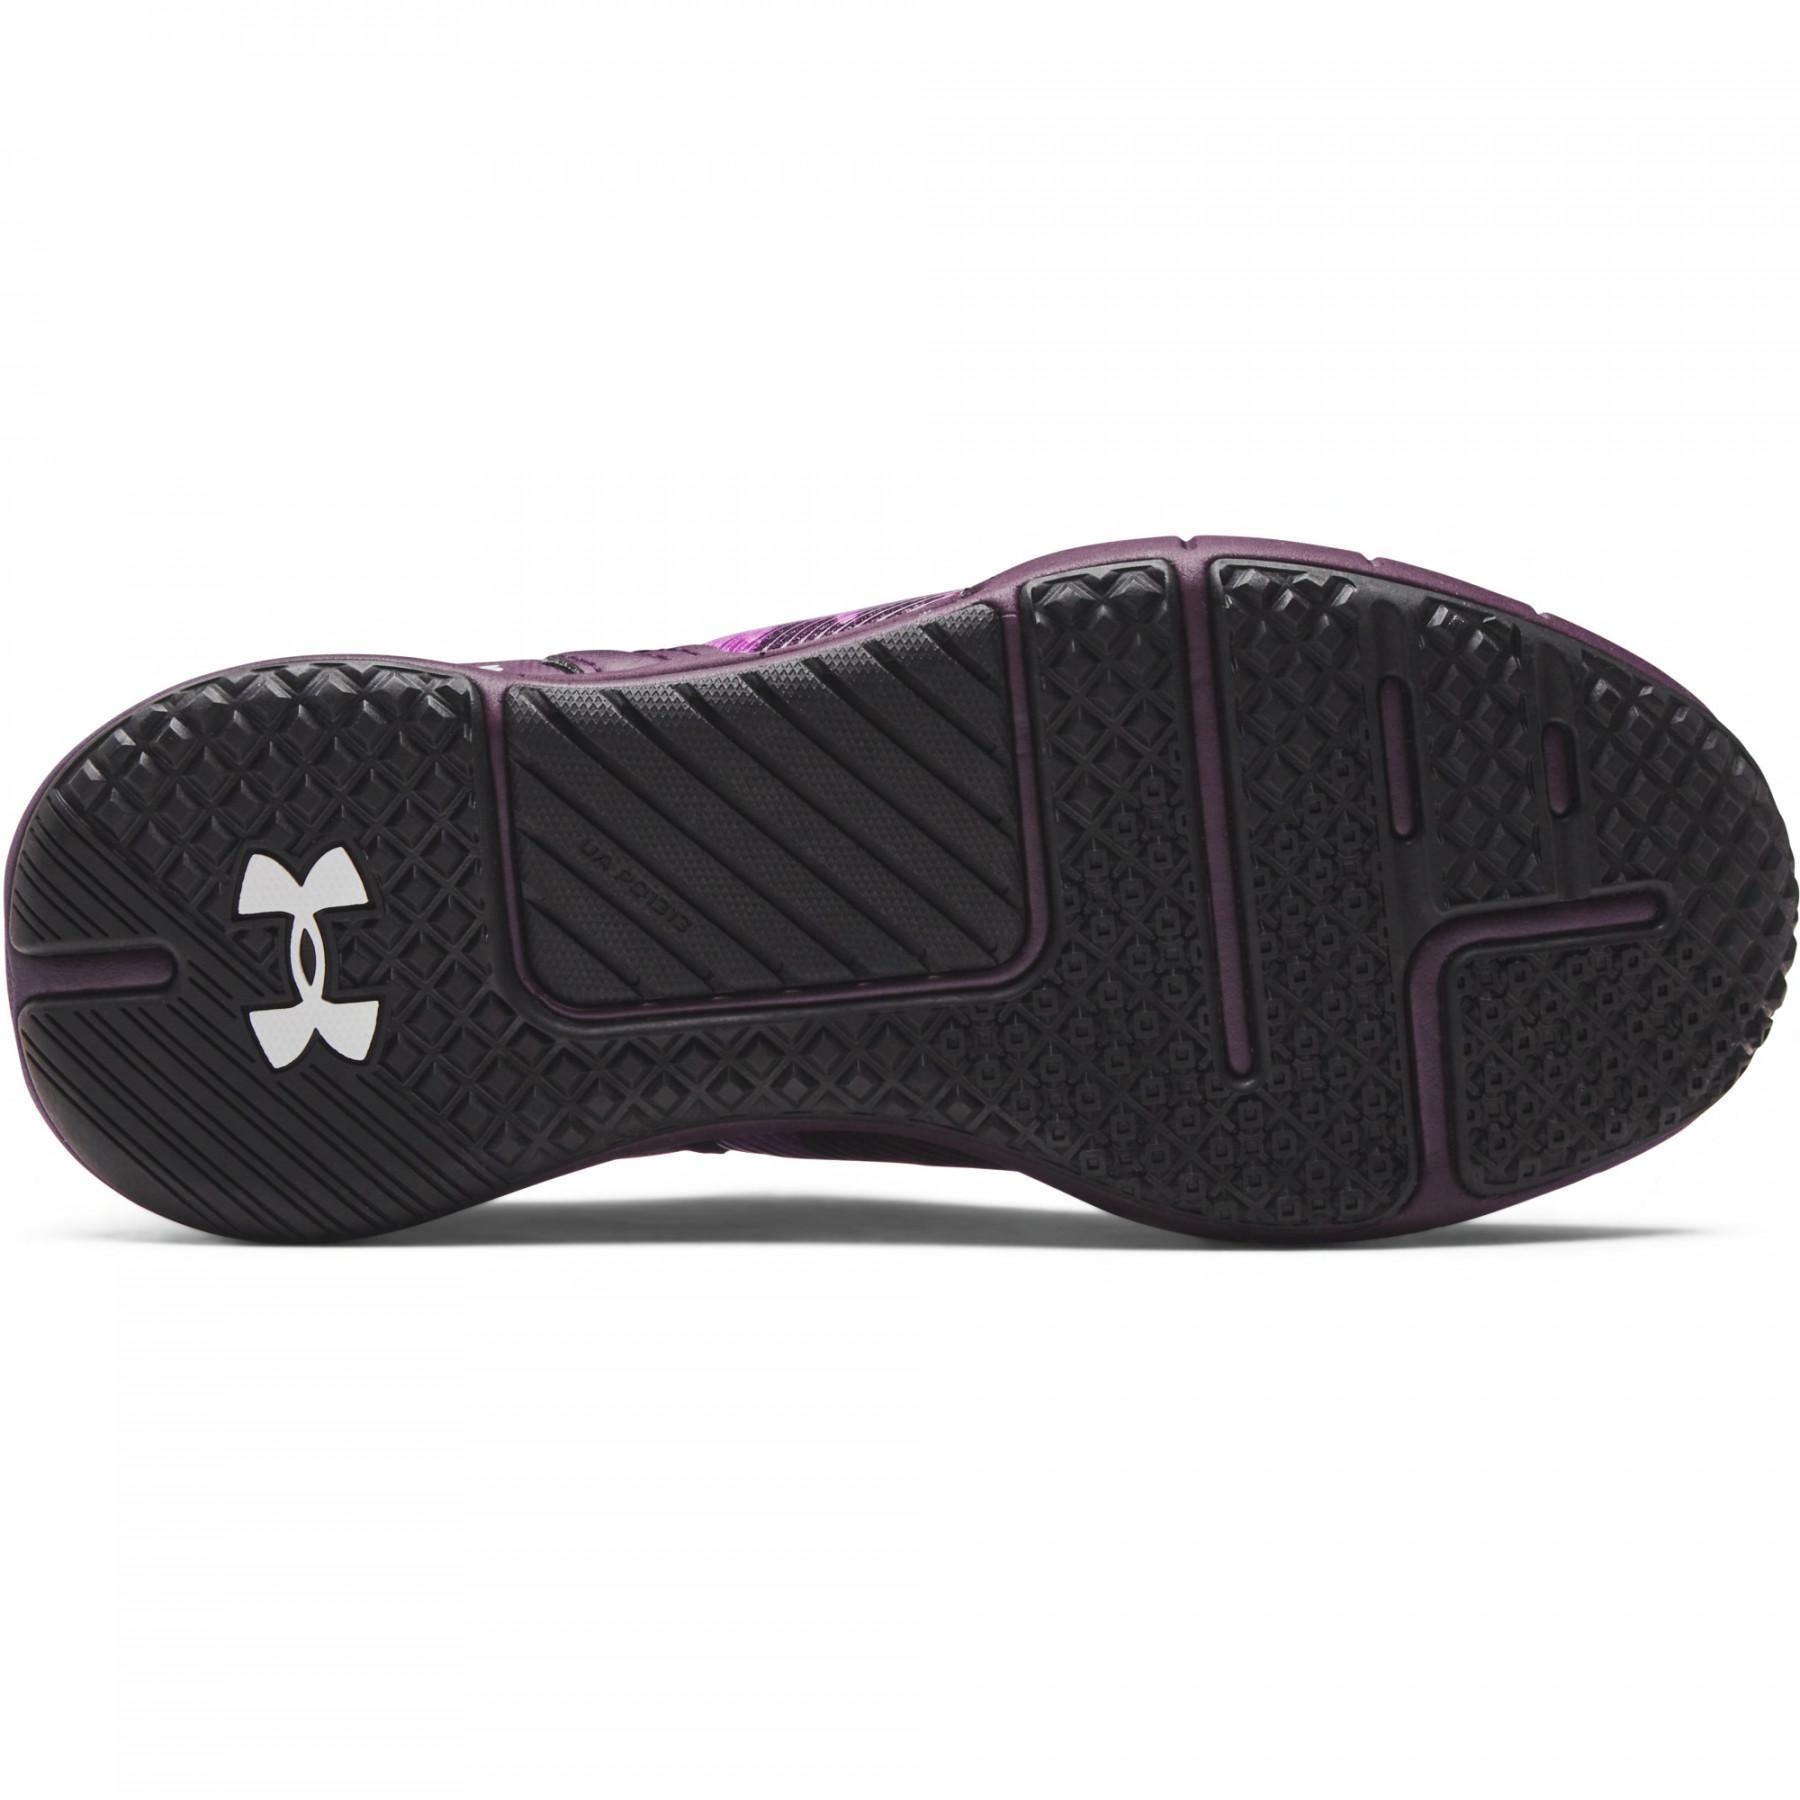 Women's shoes Under Armour HOVR Rise 2 PRNT